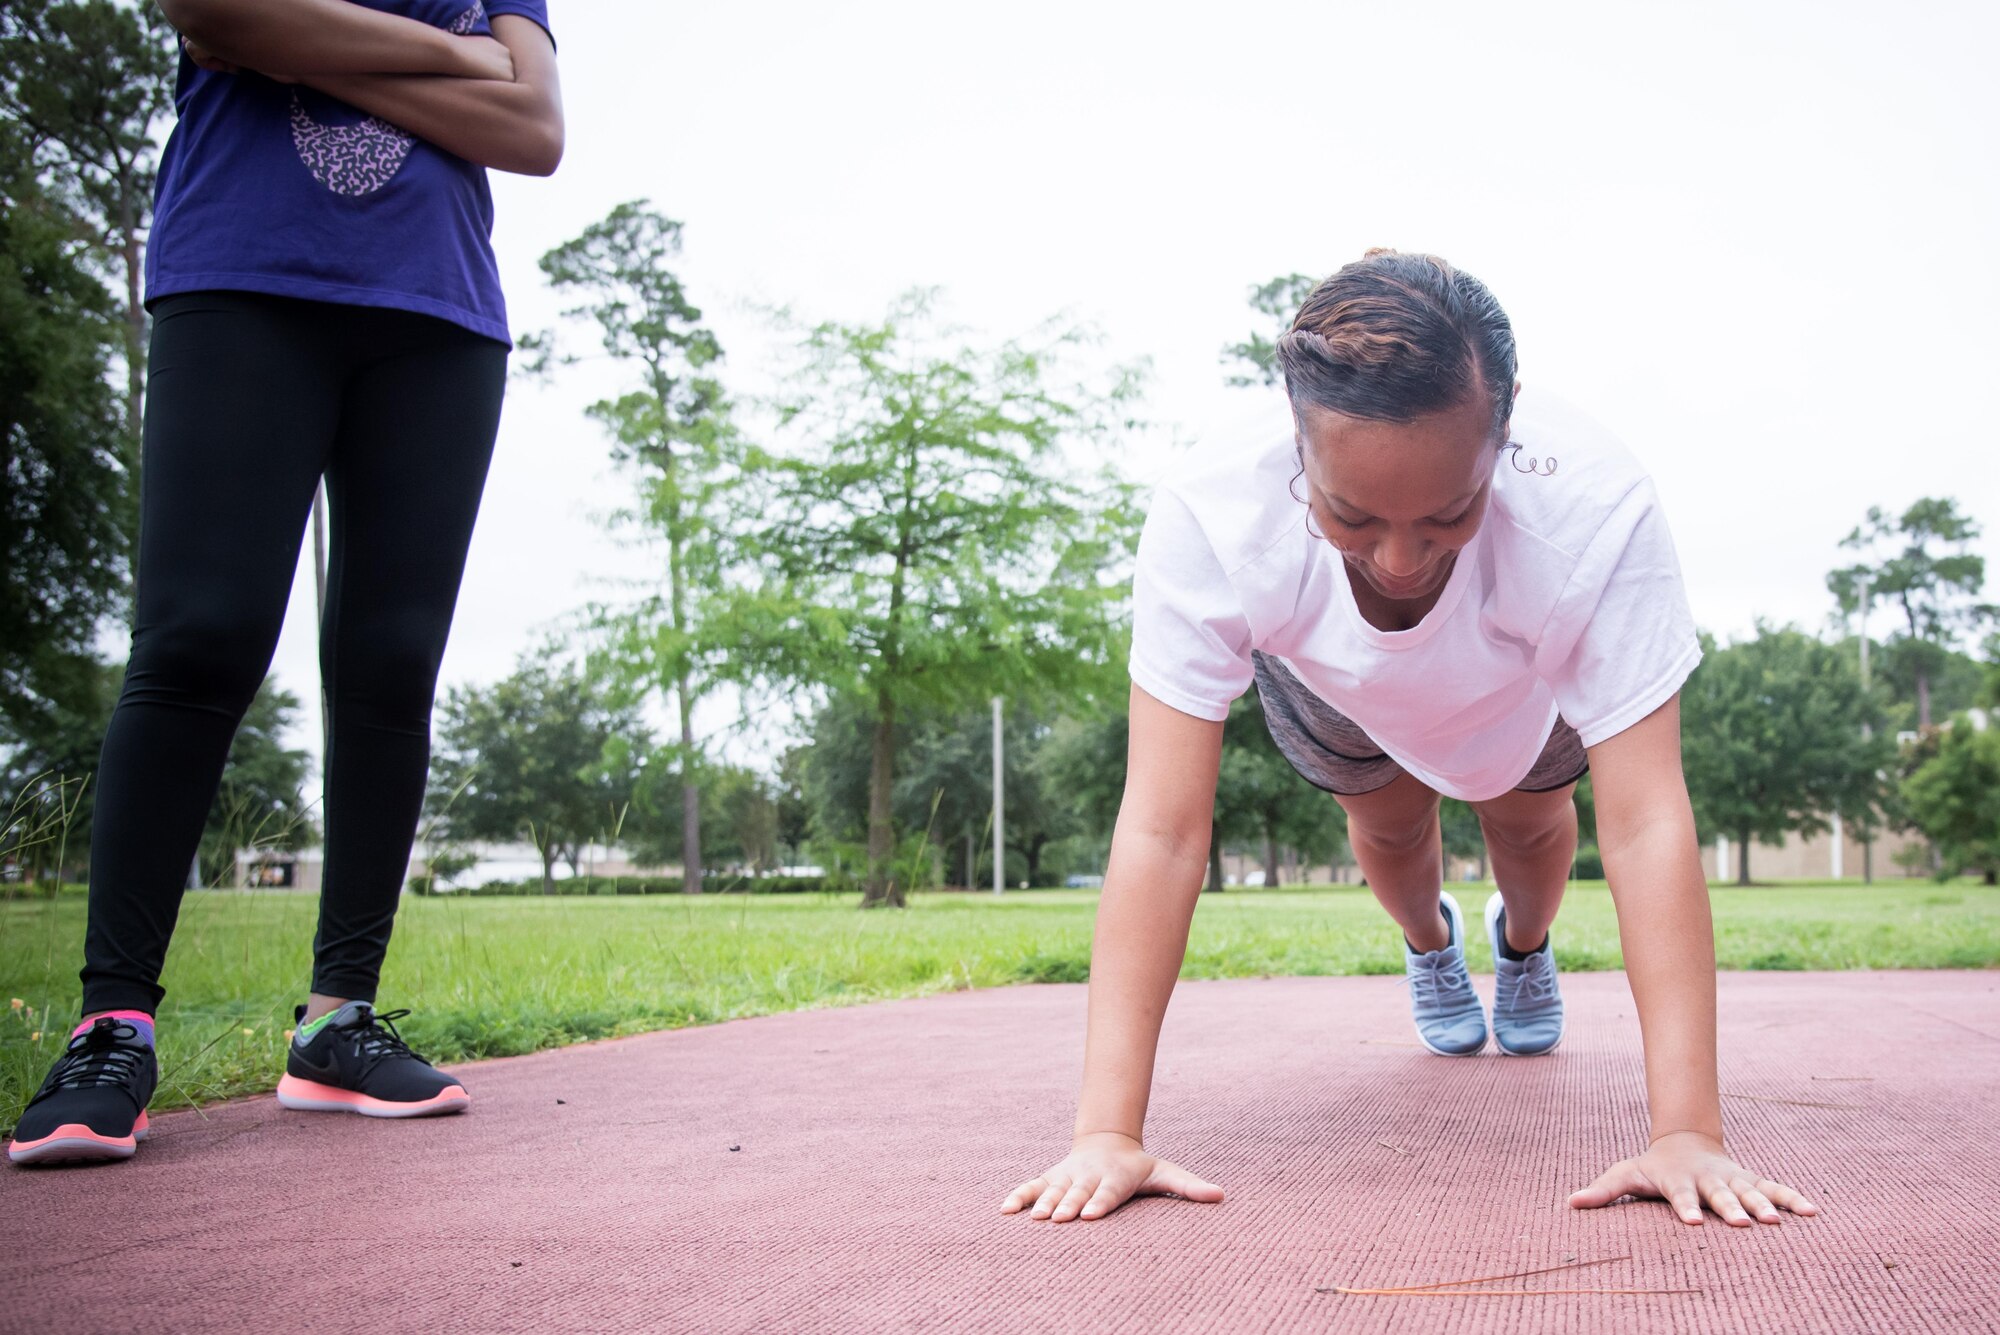 Alexia Melton, 403rd Developmental and Training Flight trainee, practices pushups during a physical training session June 3, 2017 at Keesler Air Force Base, Mississippi. (U.S. Air Force photo/Staff Sgt. Heather Heiney)